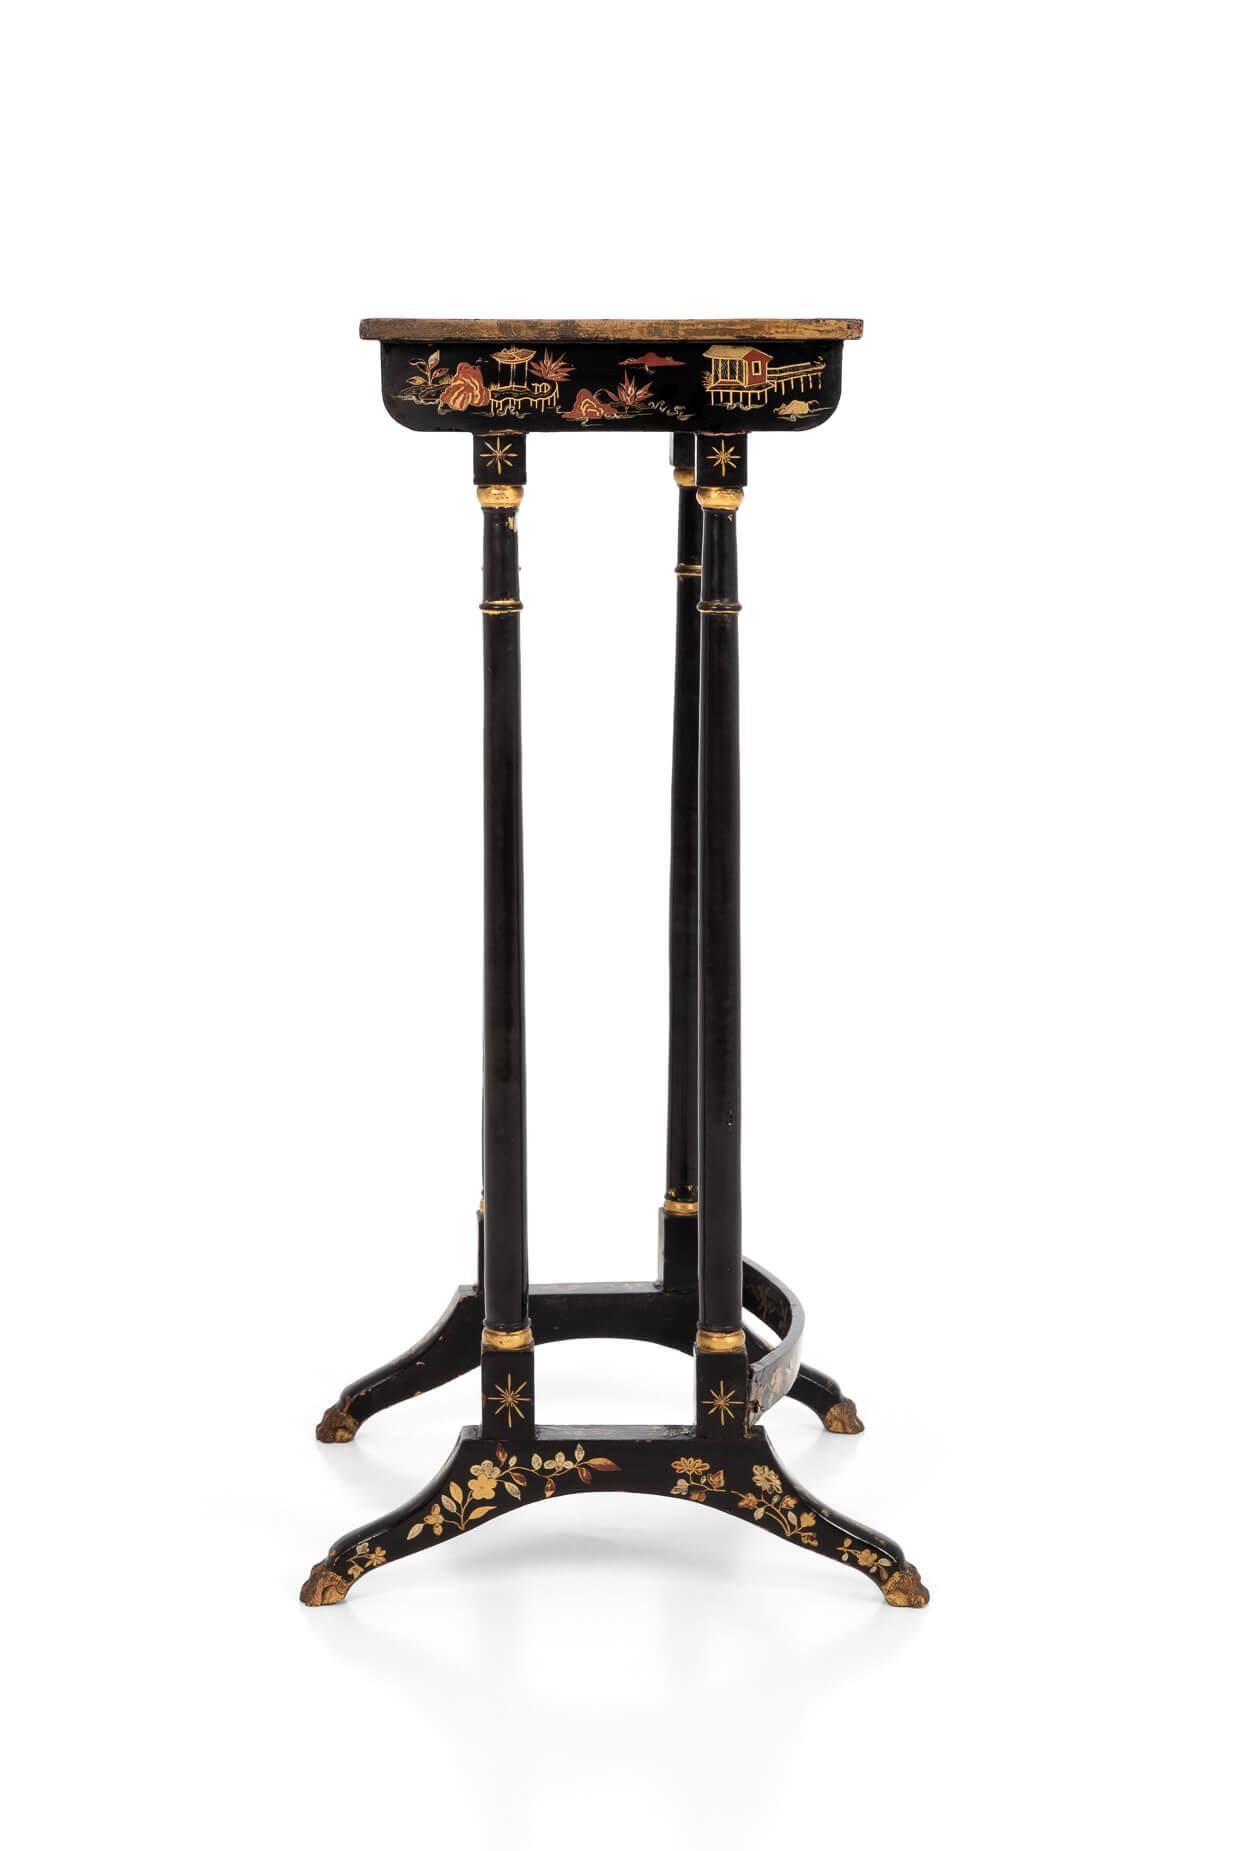 Nest of Three Regency Chinoiserie Gilt And Black Lacquer Tables, circa 1815 For Sale 3